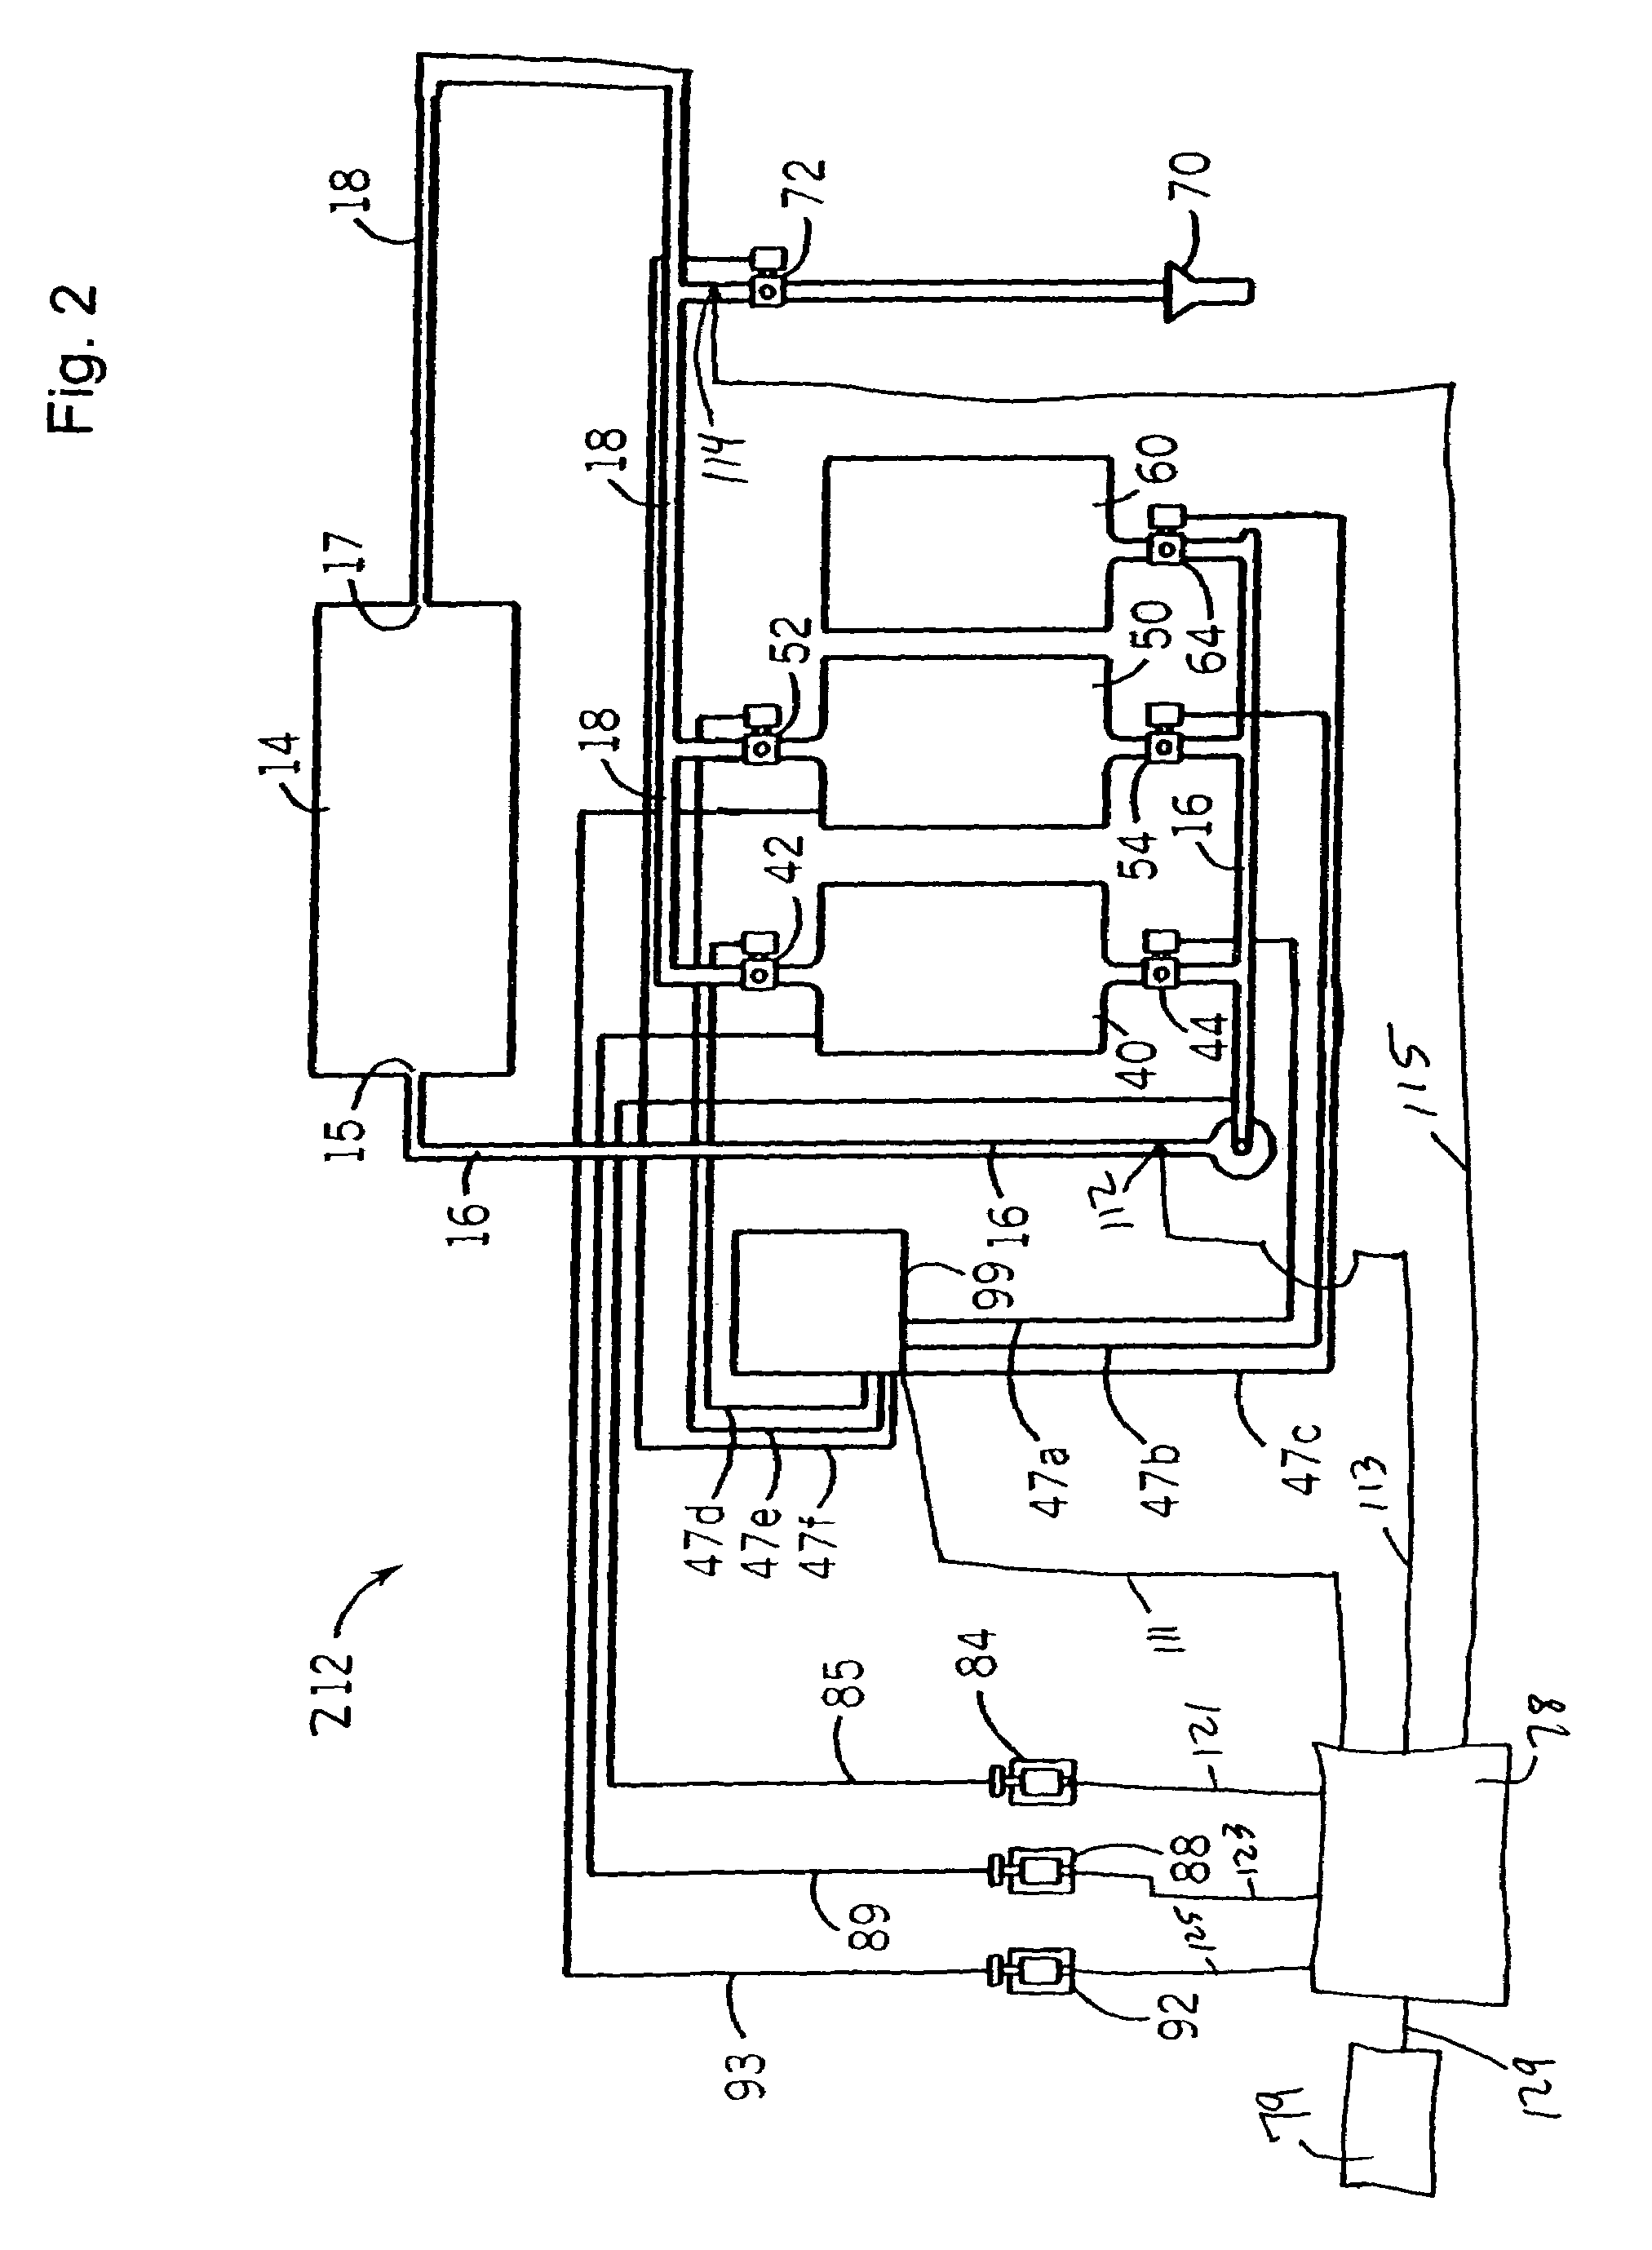 Chemical concentration controller and recorder